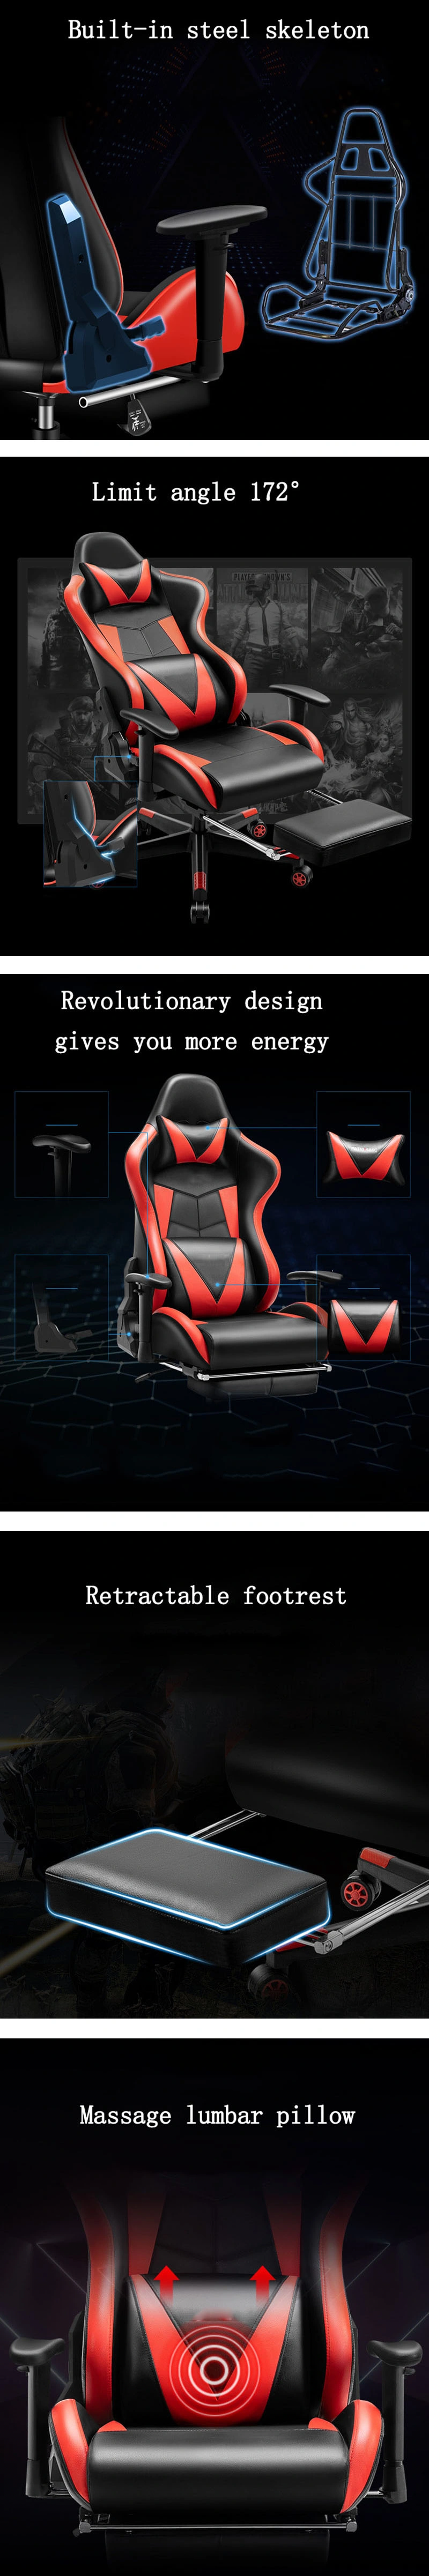 Free Shipping Racer Leather Style Footrest Brand Floor Rocker Black Mechanism Racing Office Custom Chairs Sample Gaming Chair